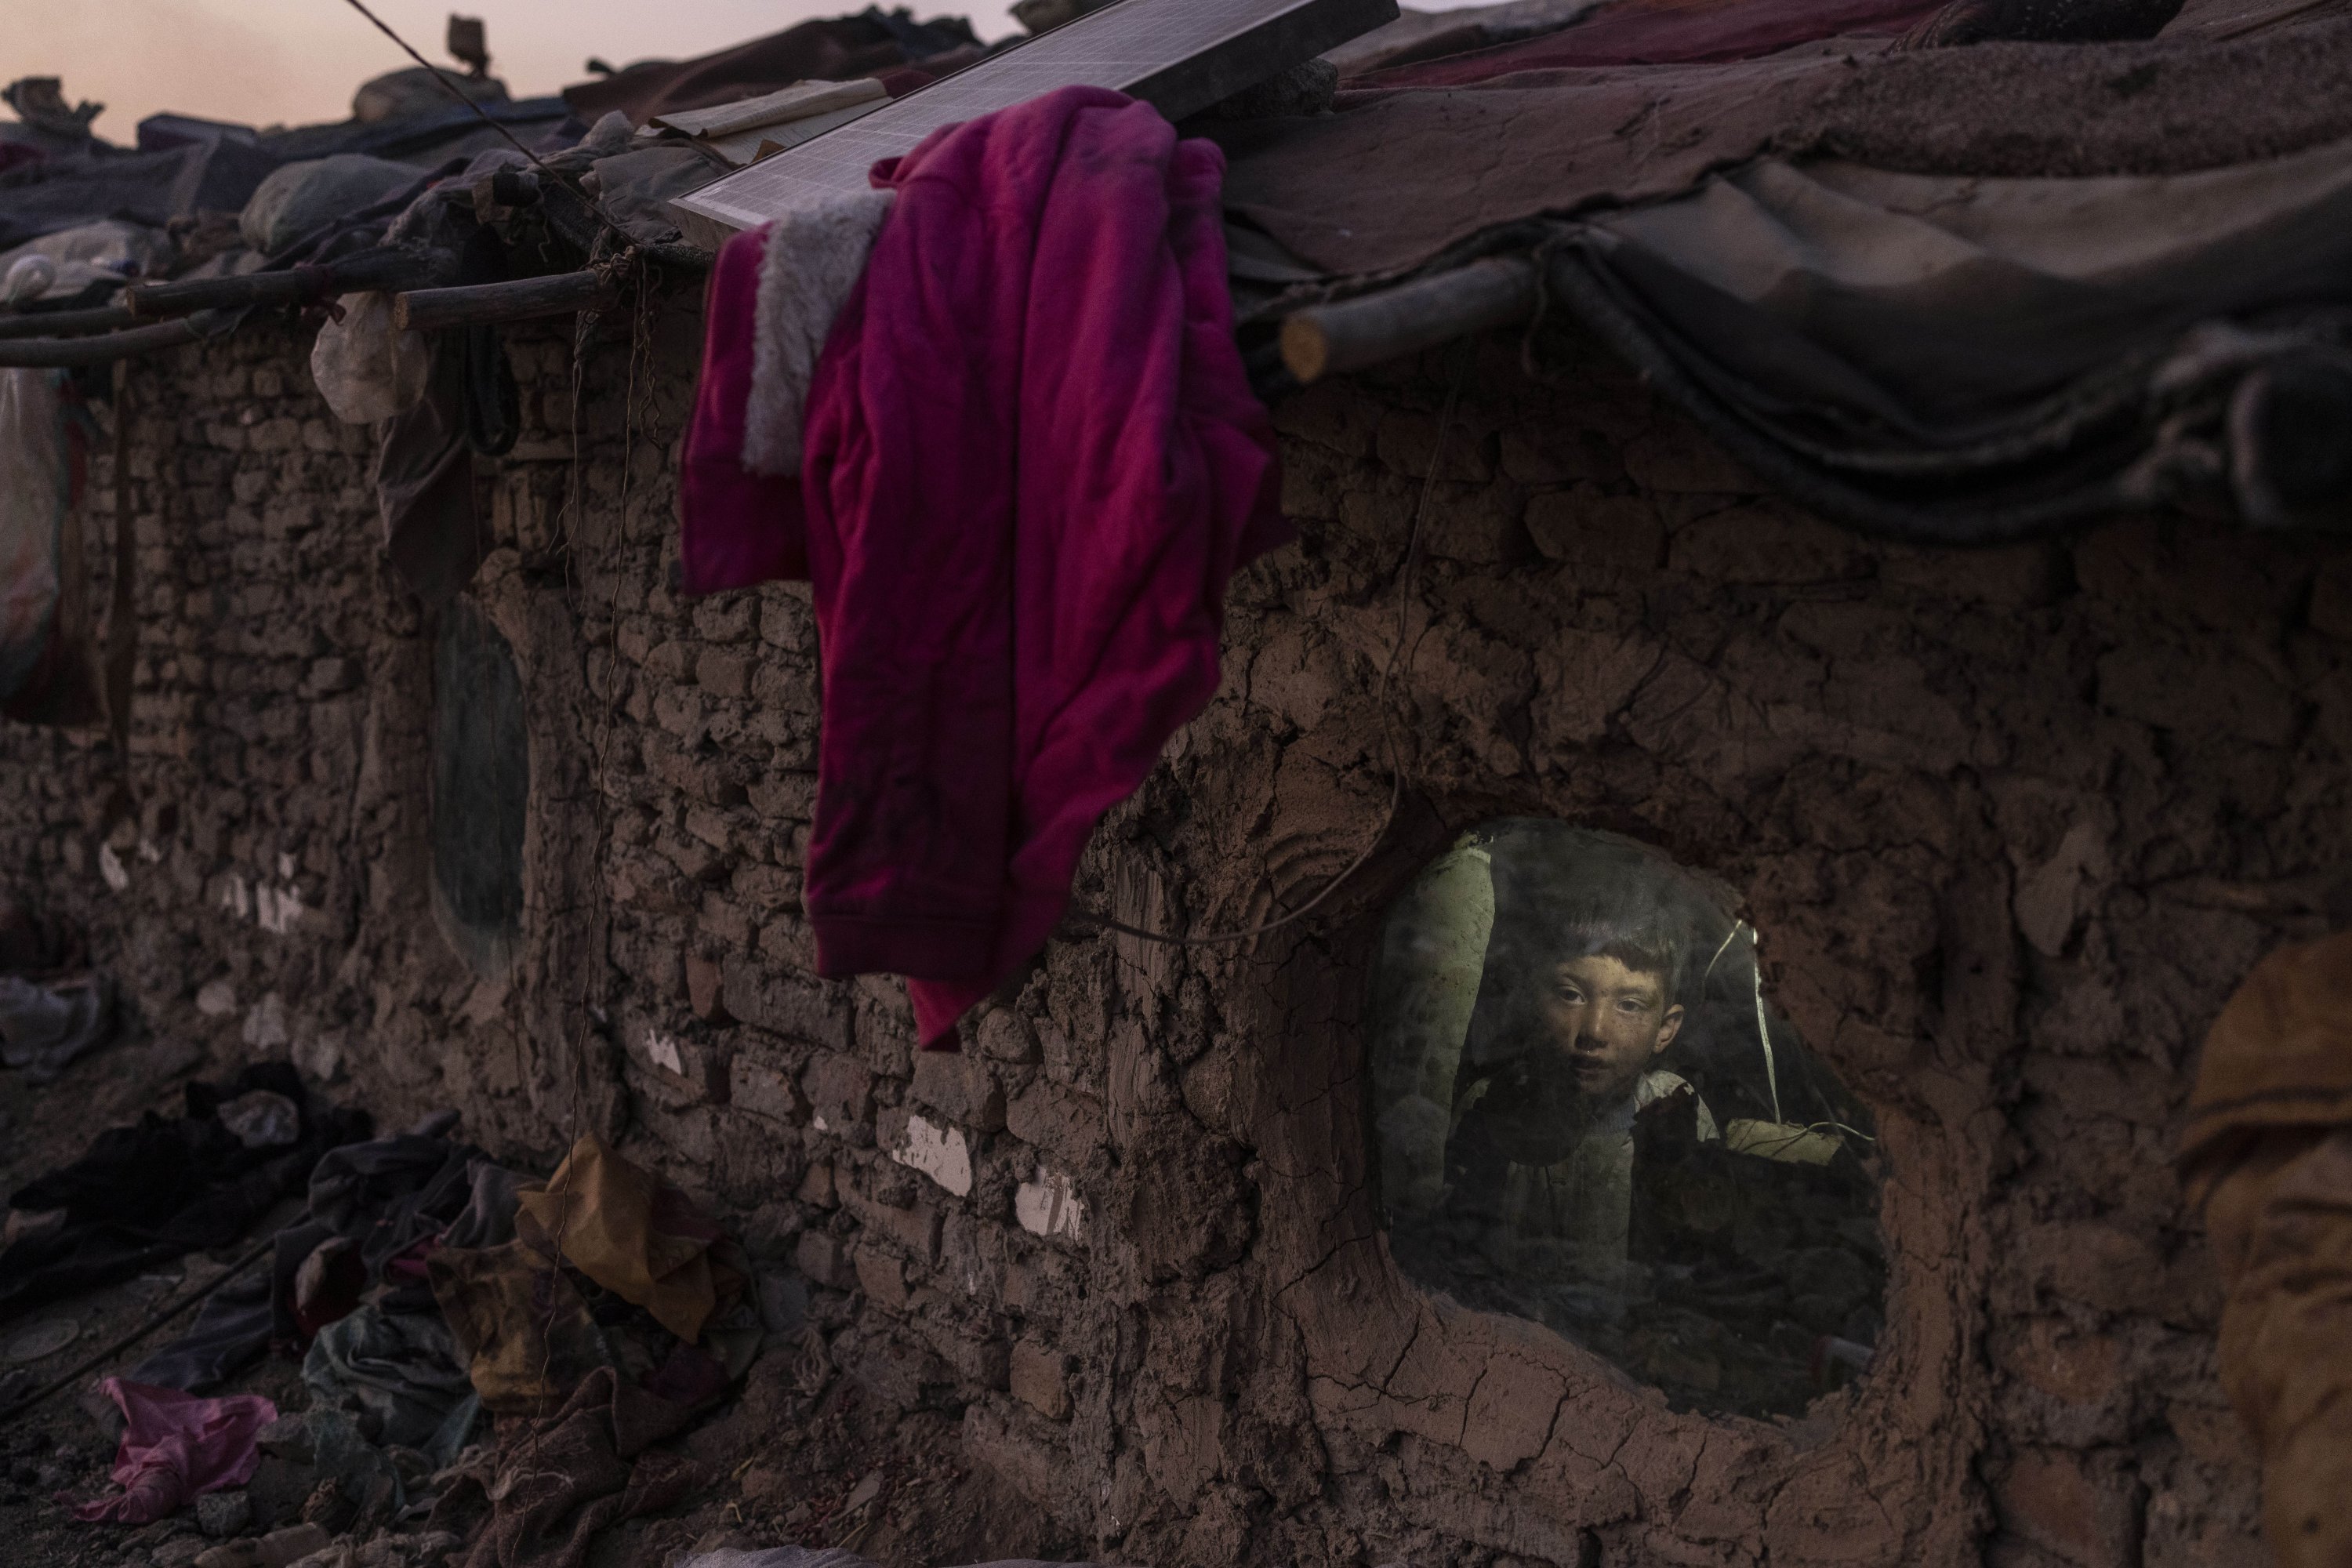 A child looks out of a window of his home in a neighborhood where many internally displaced people have been living for years, in Kabul, Afghanistan, Dec. 7, 2021. (AP Photo)